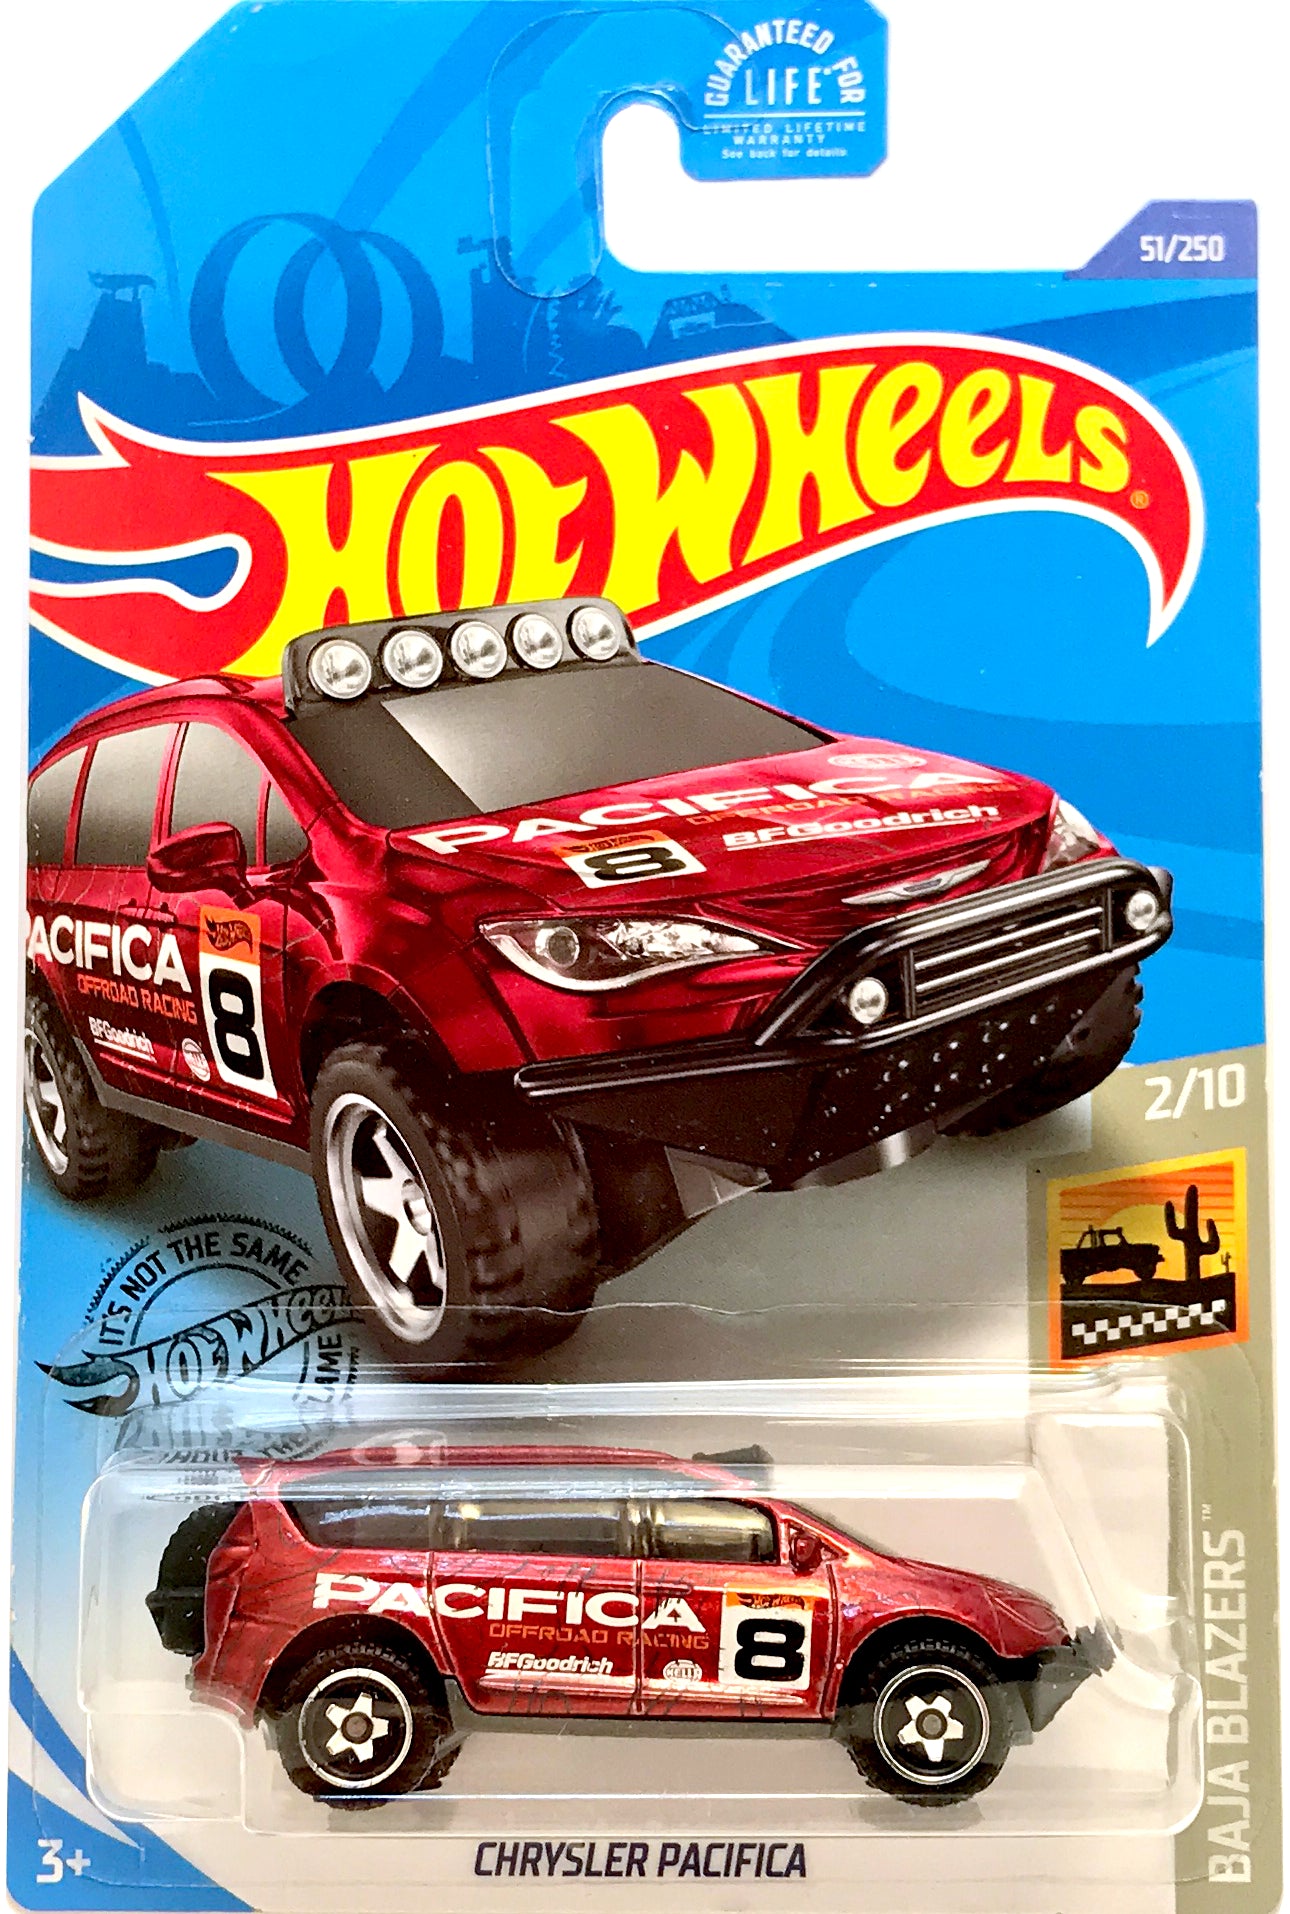 2020 Hot Wheels Mainline #051 - Chrysler Pacifica (Red) GHB85